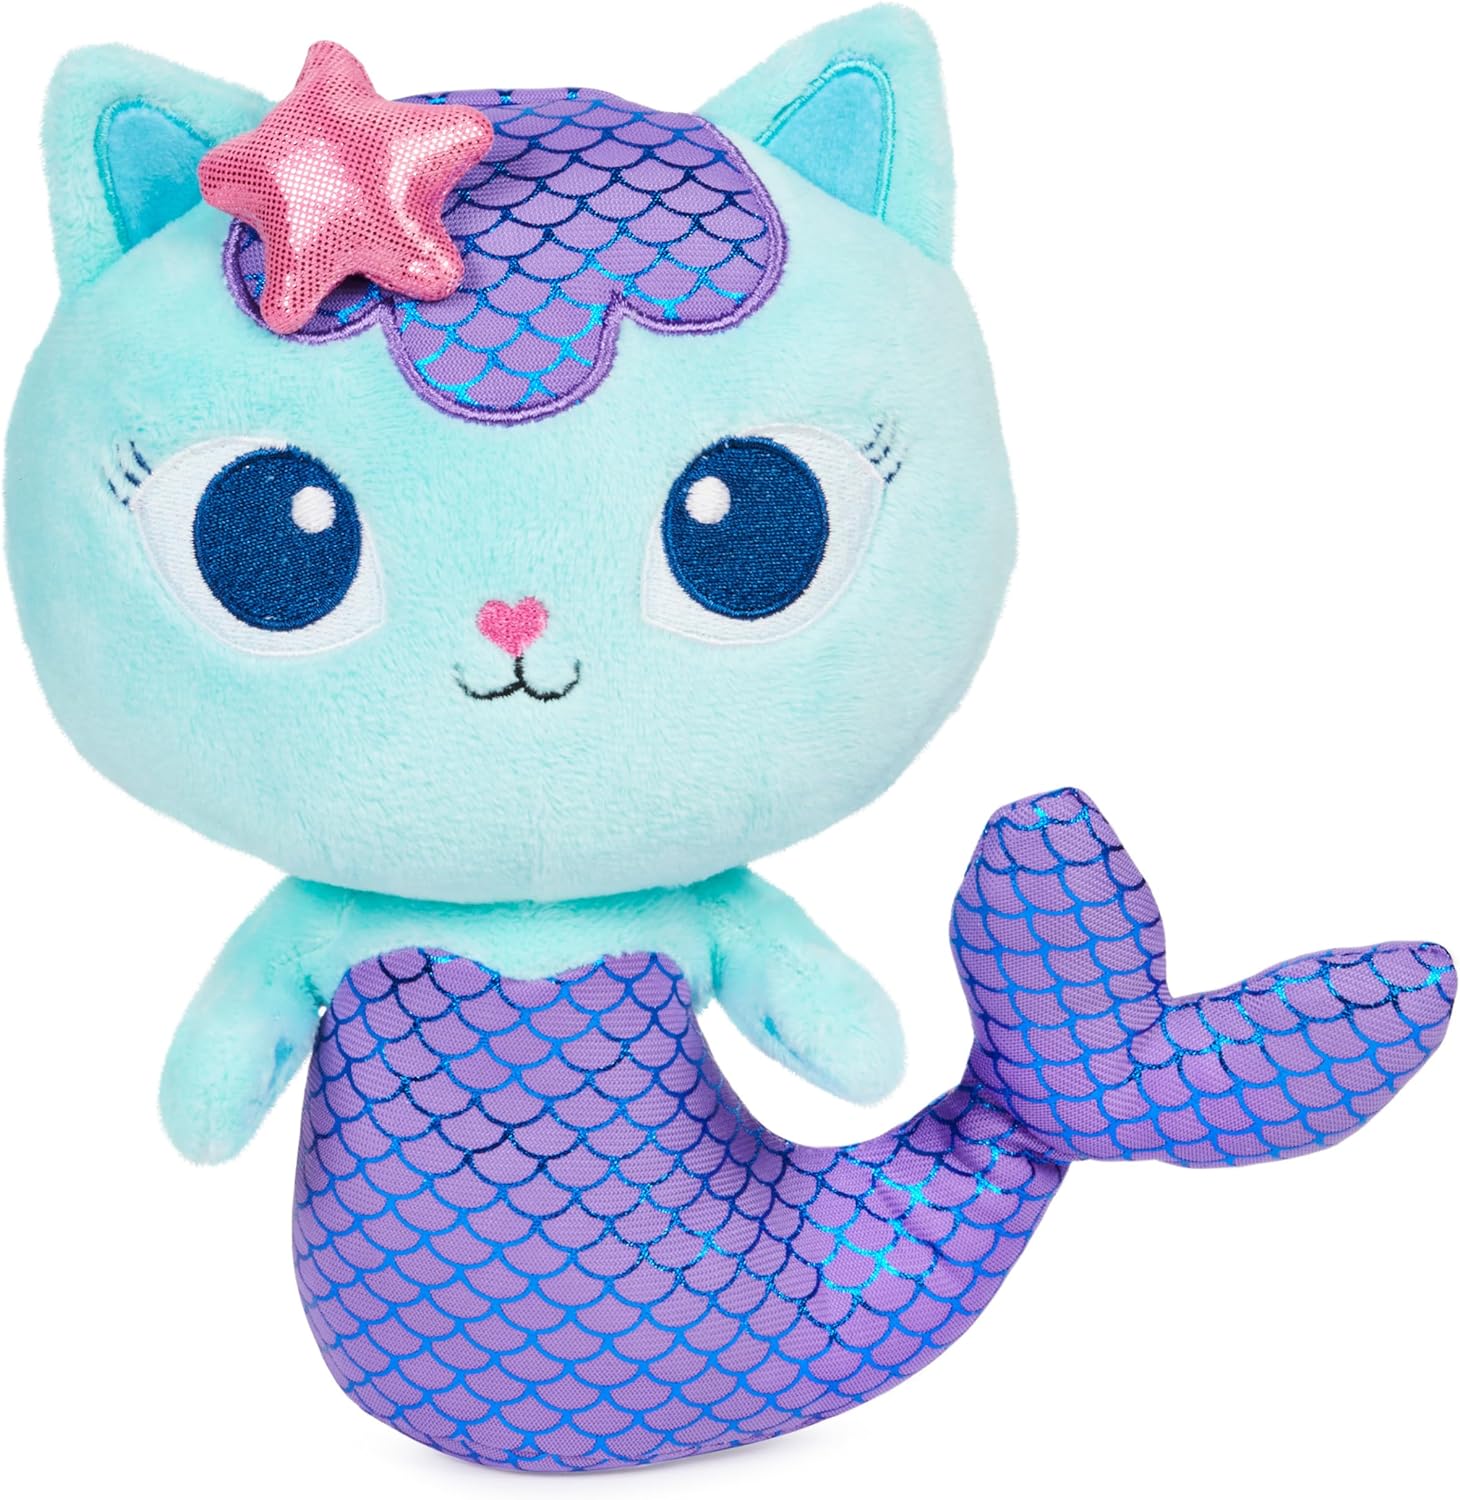 Gabby's Dollhouse Purr-ific Plush Toy: 8" Mercat $7.49, 7" Kitty Fairy $7.99 + Free Shipping w/ Prime or on $35+